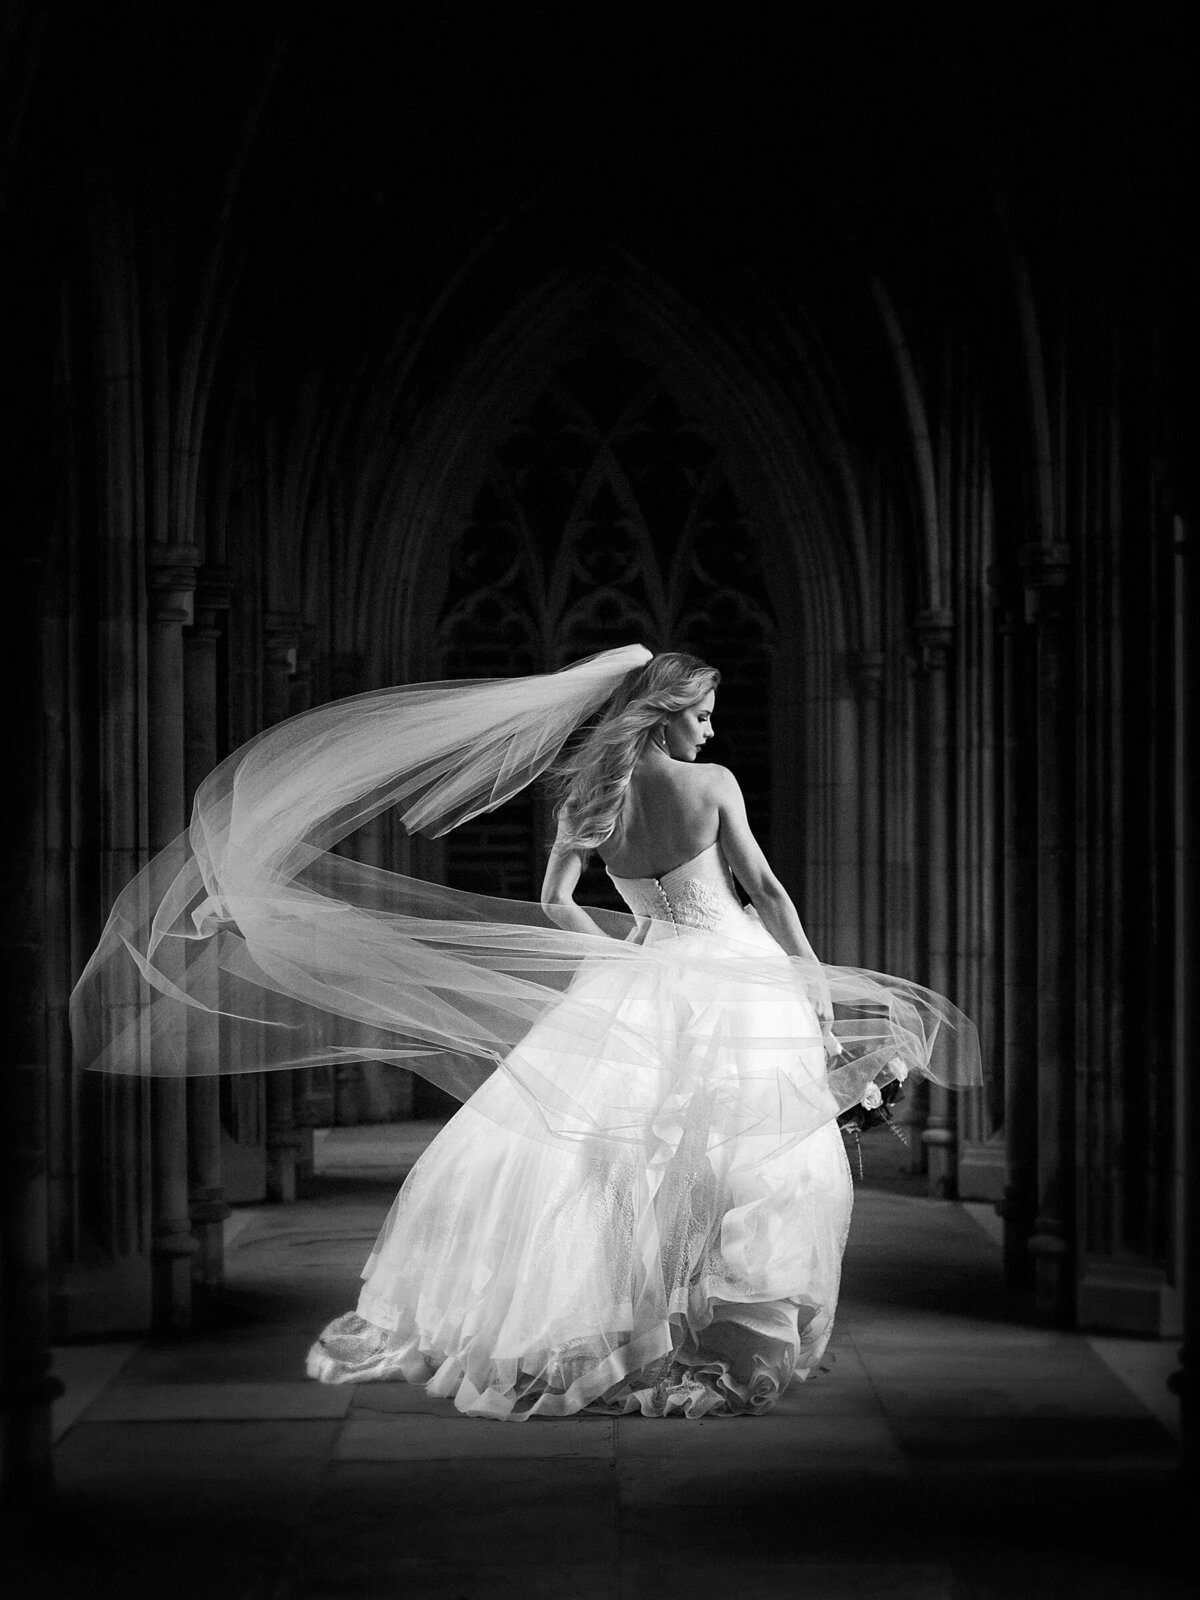 A bride walking along a corridor as her veil flows in the wind